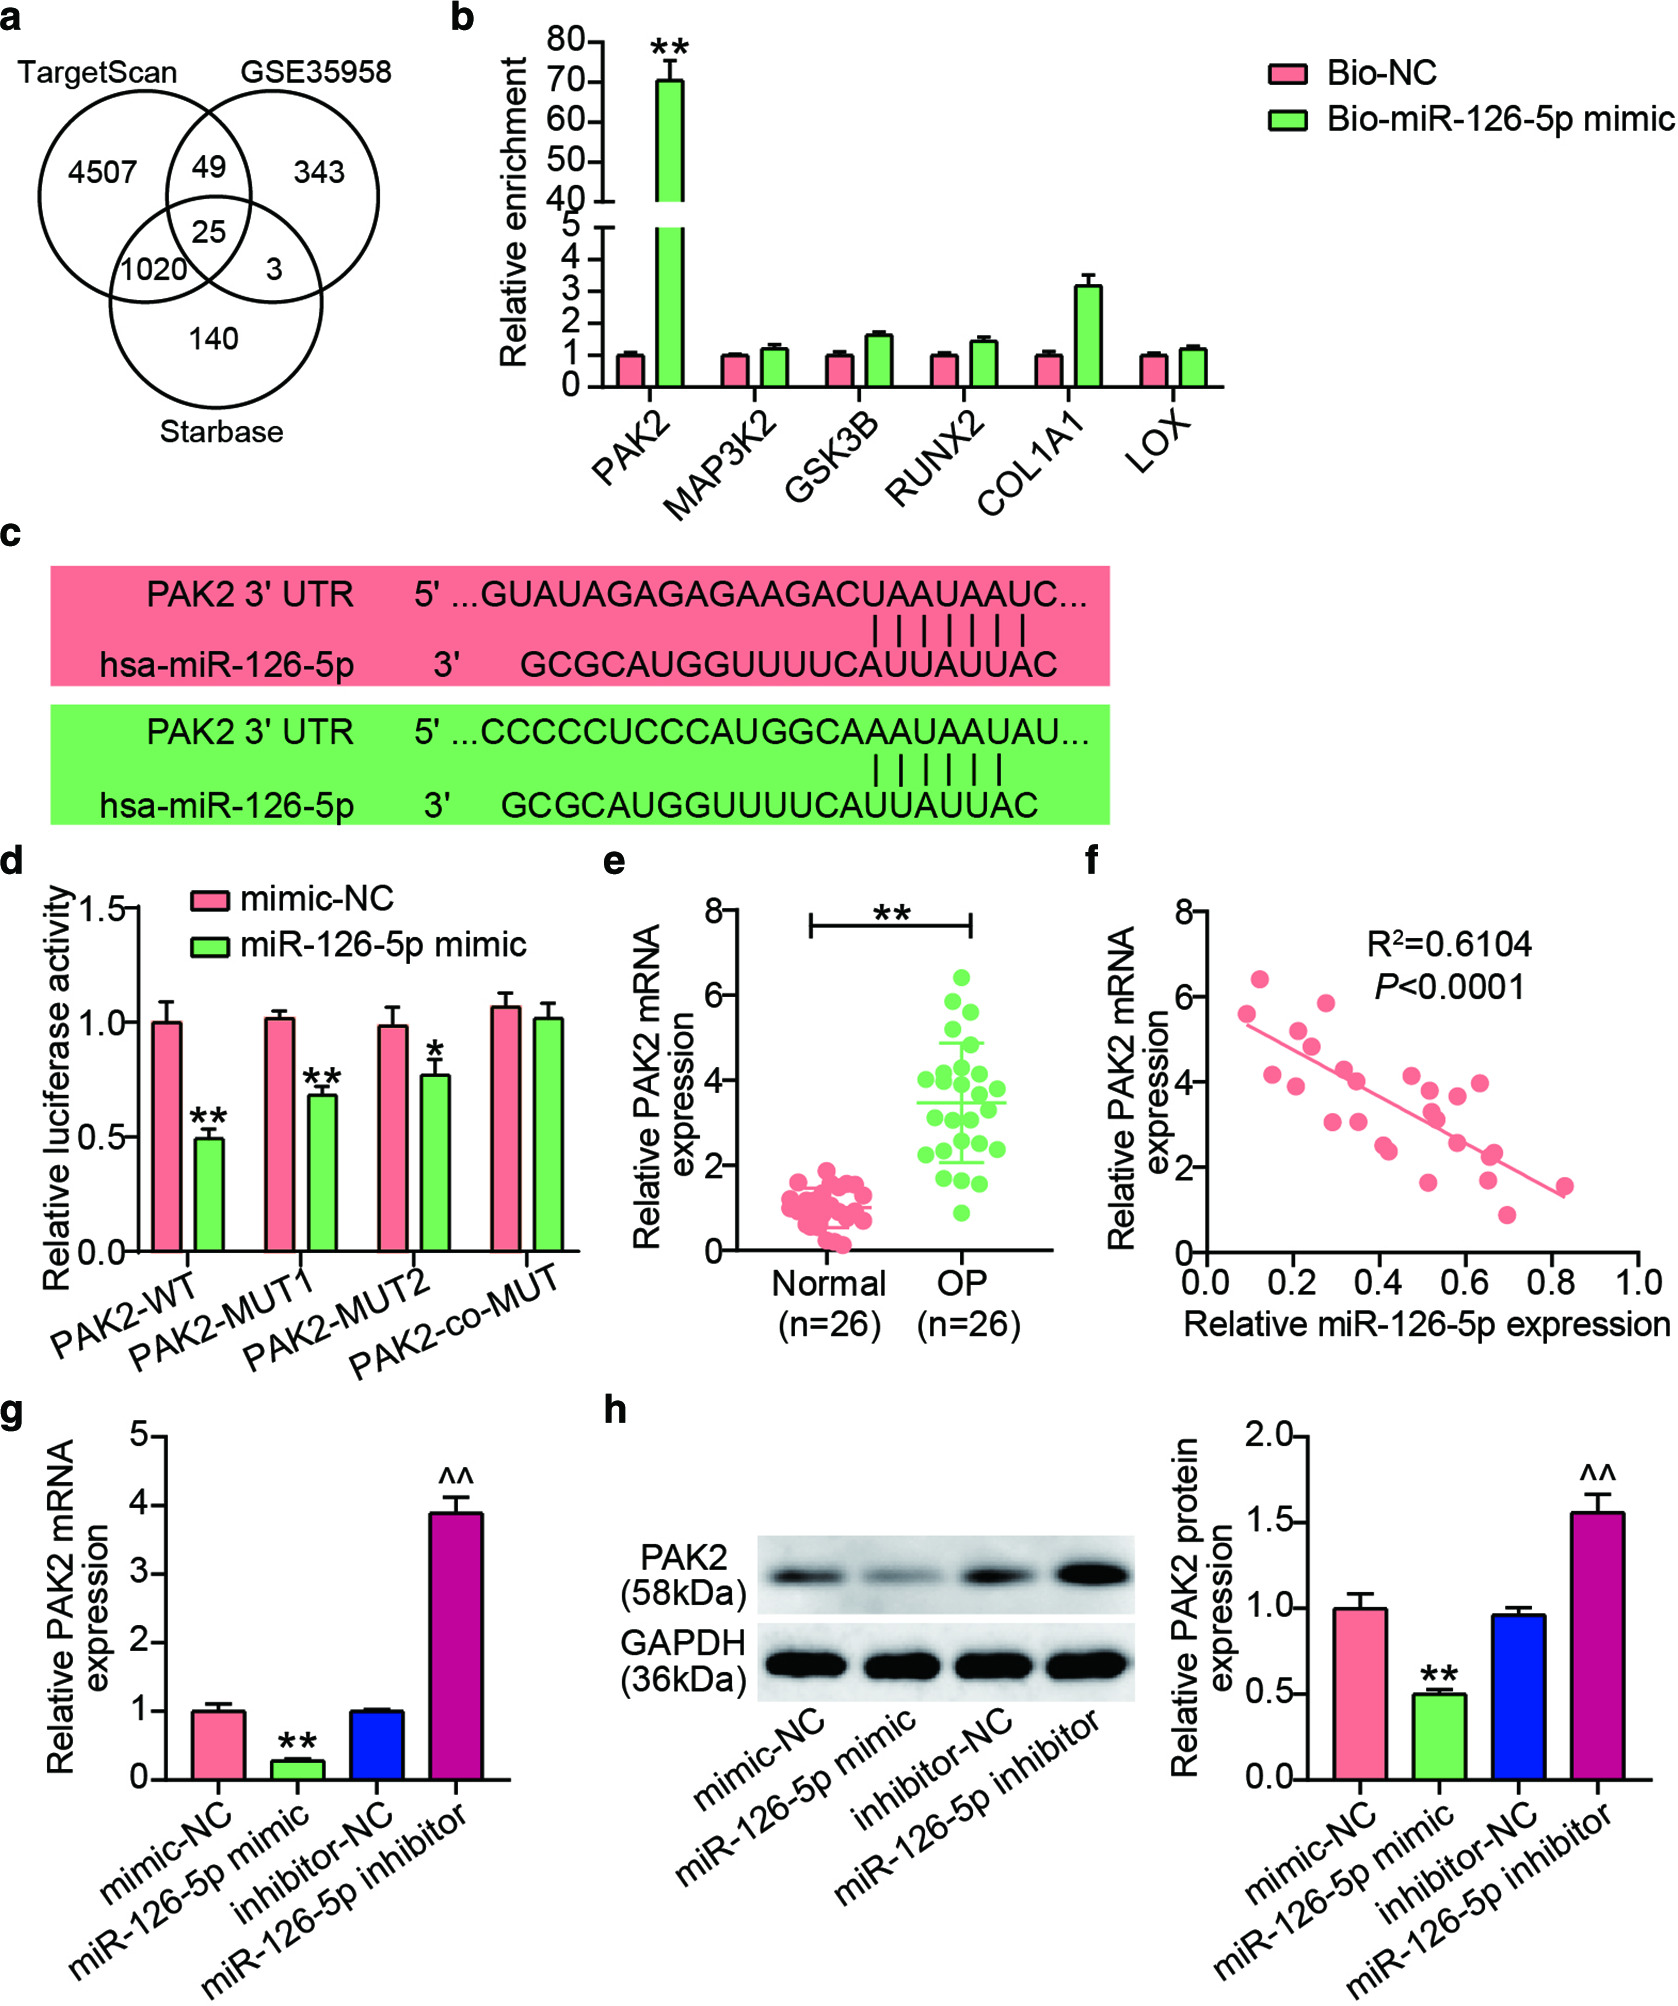 Fig. 5 
            Group I Pak family member p21-activated kinase 2 (PAK2) was a direct target of microRNA (miR)-126-5p in human bone marrow-derived mesenchymal stem cells (hBMSCs). a) A total of 25 genes were overlapped from TargetScan, GSE35958, and Starbase. b) The enrichments of PAK2, mitogen-activated protein 3 kinase 2 (MAP3K2), glycogen synthase kinase 3 beta (GSK3B), Runt-related transcription factor 2 (RUNX2), collagen, type I, alpha 1 (COL1A1), and lysyl oxidase (LOX) were detected in hBMSCs by RNA pull-down assay. c) Targetscan showed the predicted binding sequences of PAK2 for miR-126-5p. d) The relative luciferase activity was determined in hBMSCs co-transfected with PAK2-wild type (WT) or PAK2-mutant (MUT) and mimic-negative control (NC) or miR-126-5p mimic. e) PAK2 expression in osteoporosis (OP) tissues was determined with quantitative real-time polymerase chain reaction (qRT-PCR). f) A negative association between miR-126-5p and PAK2. g) and h) PAK expression in transfected hBMSCs was measured by g) qRT-PCR and h) western blot. The data represent the mean (standard deviation). *p < 0.05, **p < 0.001 compared with Bio-NC or mimic-NC. ^^p < 0.001 compared with inhibitor-NC. All p-values calculated using one-way analysis of variance. GAPDH, glyceraldehyde 3-phosphate dehydrogenase; hsa, Homo sapiens; mRNA, messenger RNA; UTR, untranslated region.
          